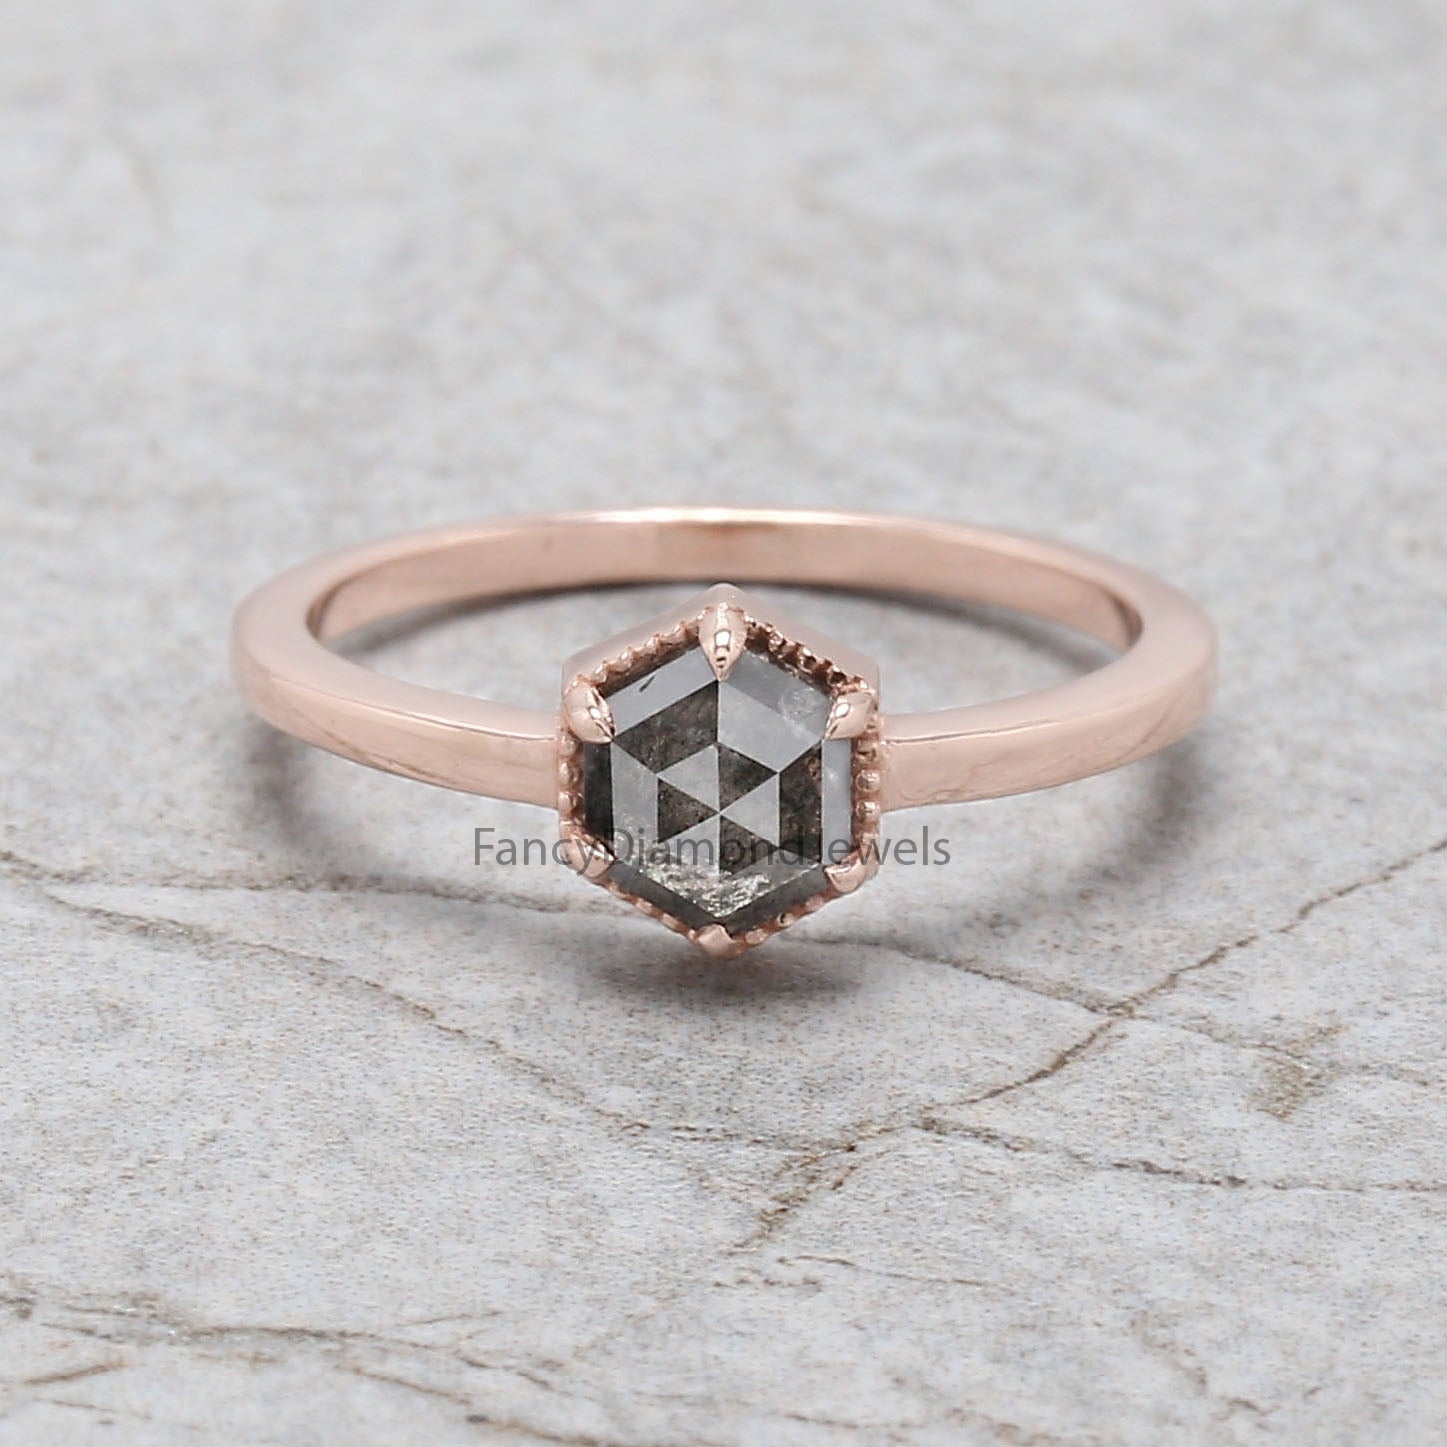 Hexagon Cut Salt And Pepper Diamond Ring 0.71 Ct 6.24 MM Hexagon Diamond Ring 14K Solid Rose Gold Silver Engagement Ring Gift For Her QL2338